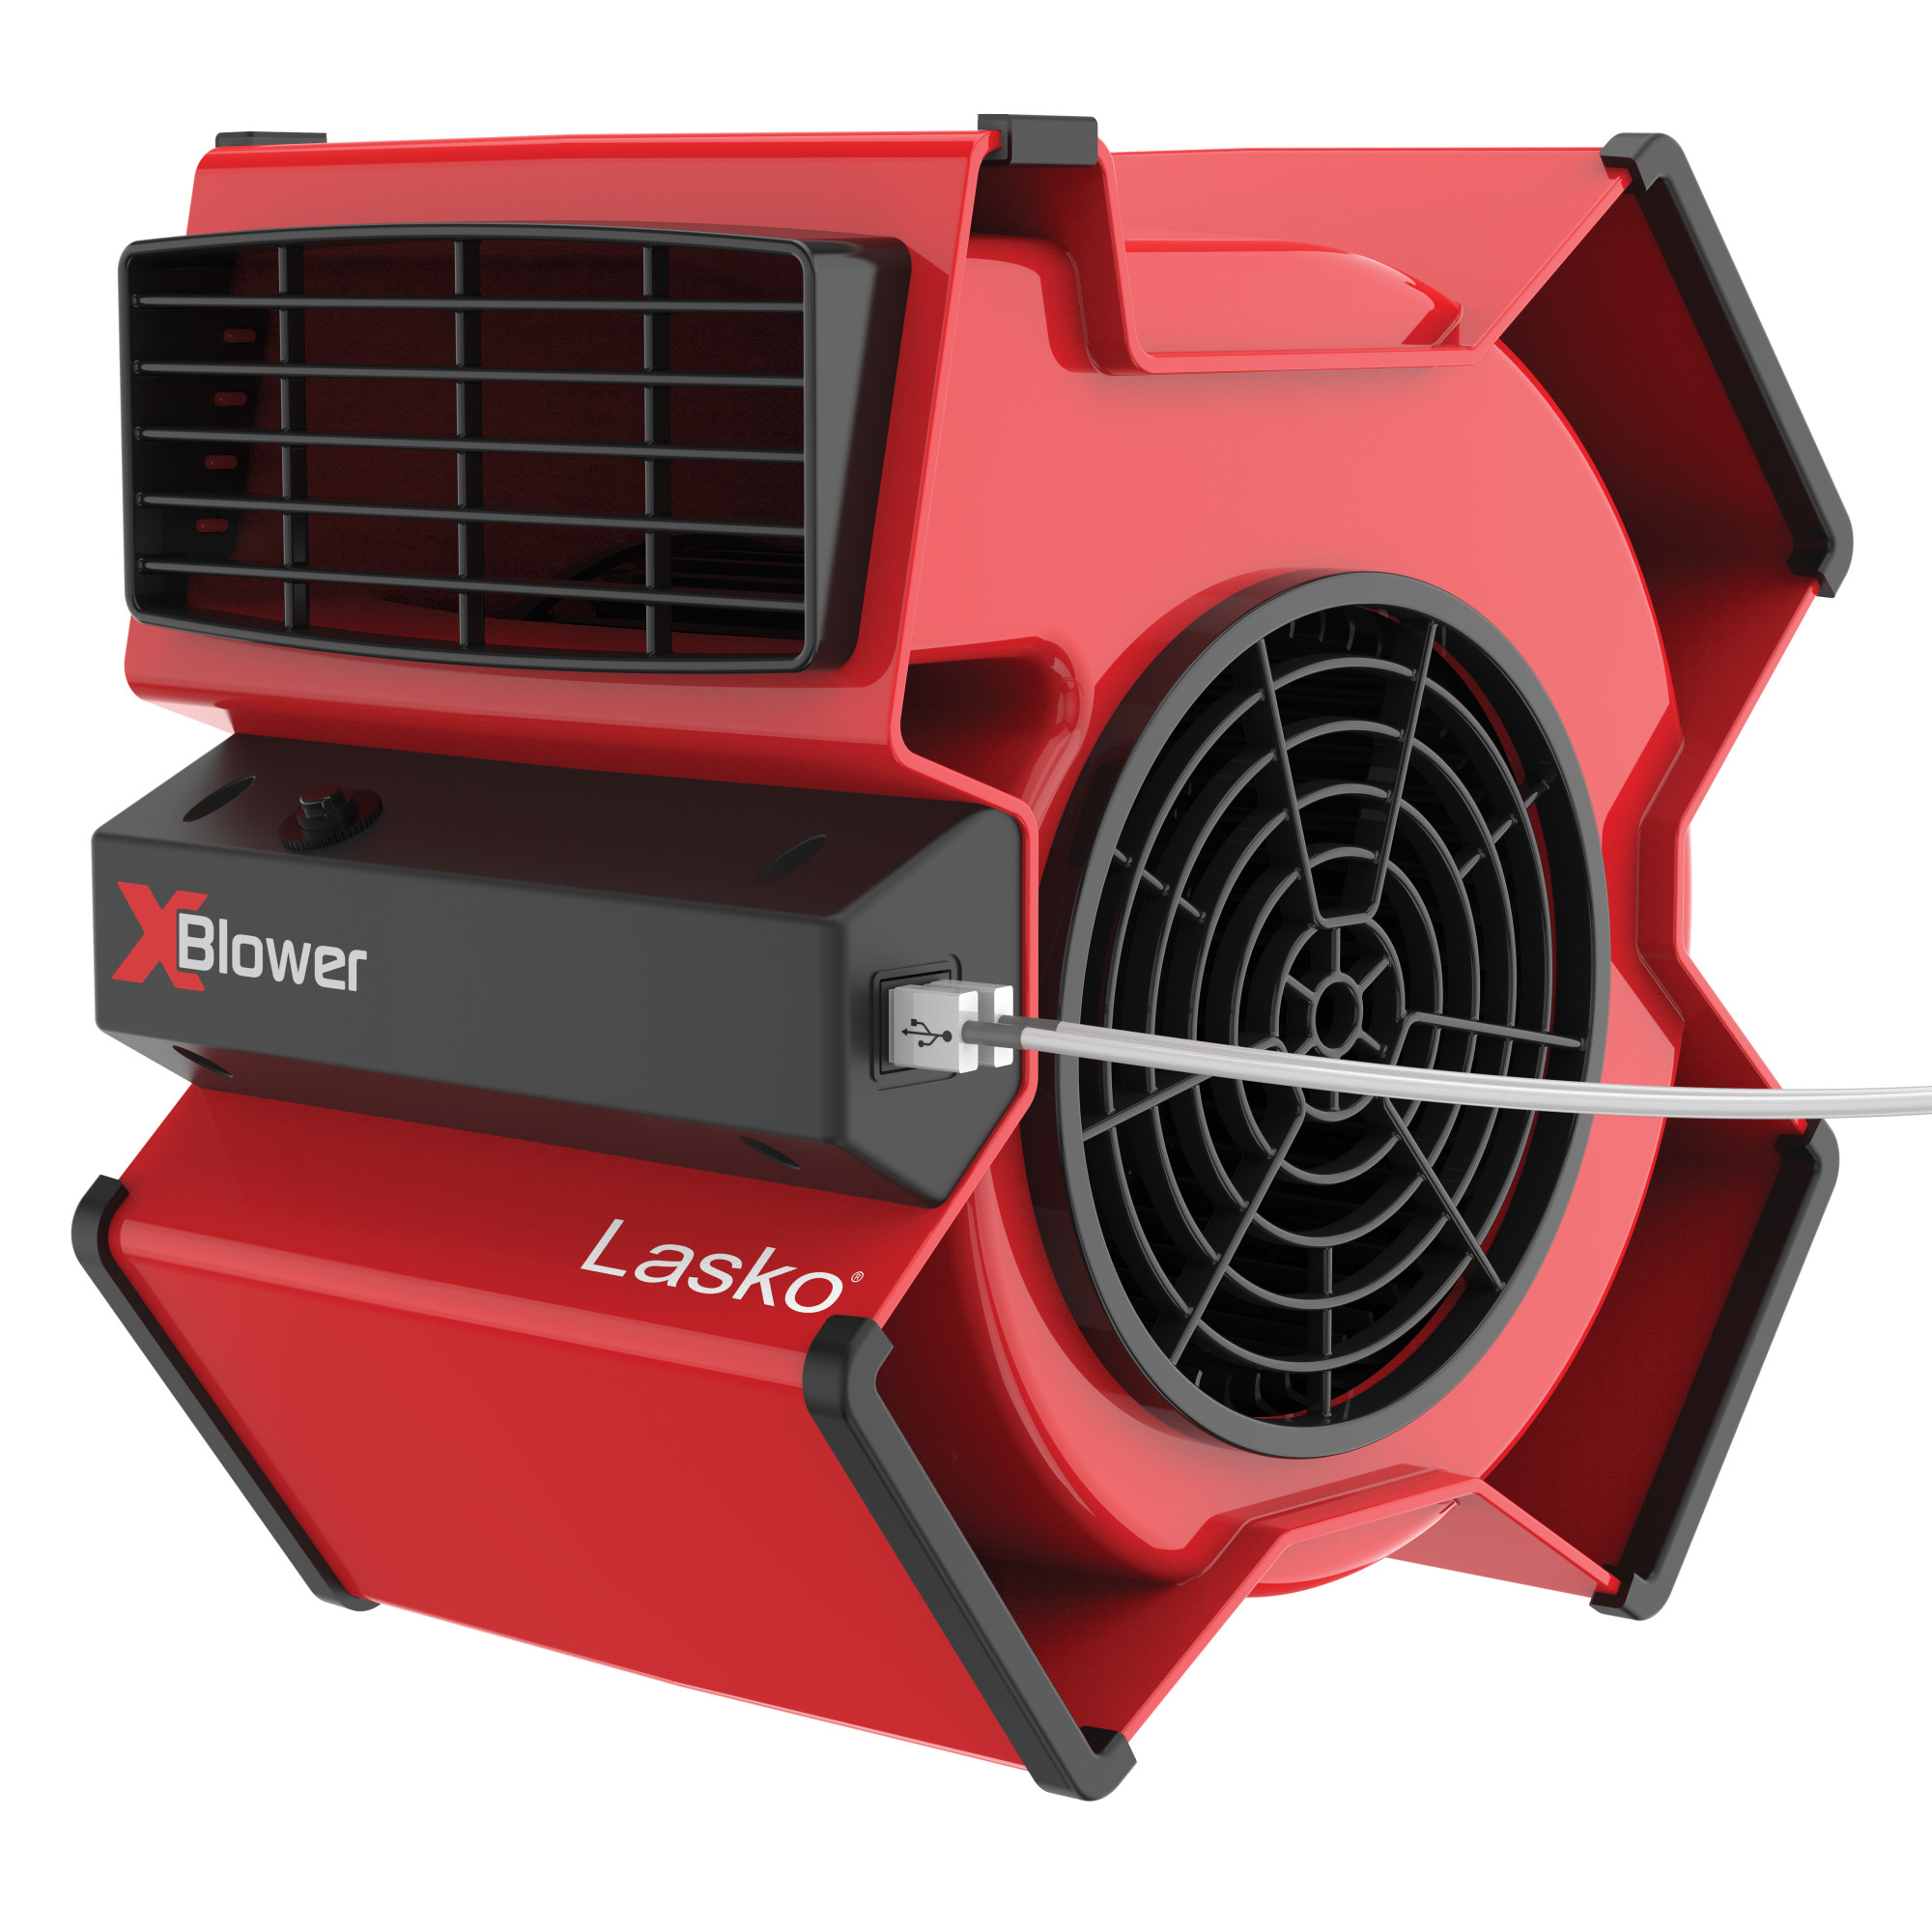 Lasko 11" X-Blower Multi-Position Utility Blower Fan with USB Port, Red, X12900, New - image 4 of 5